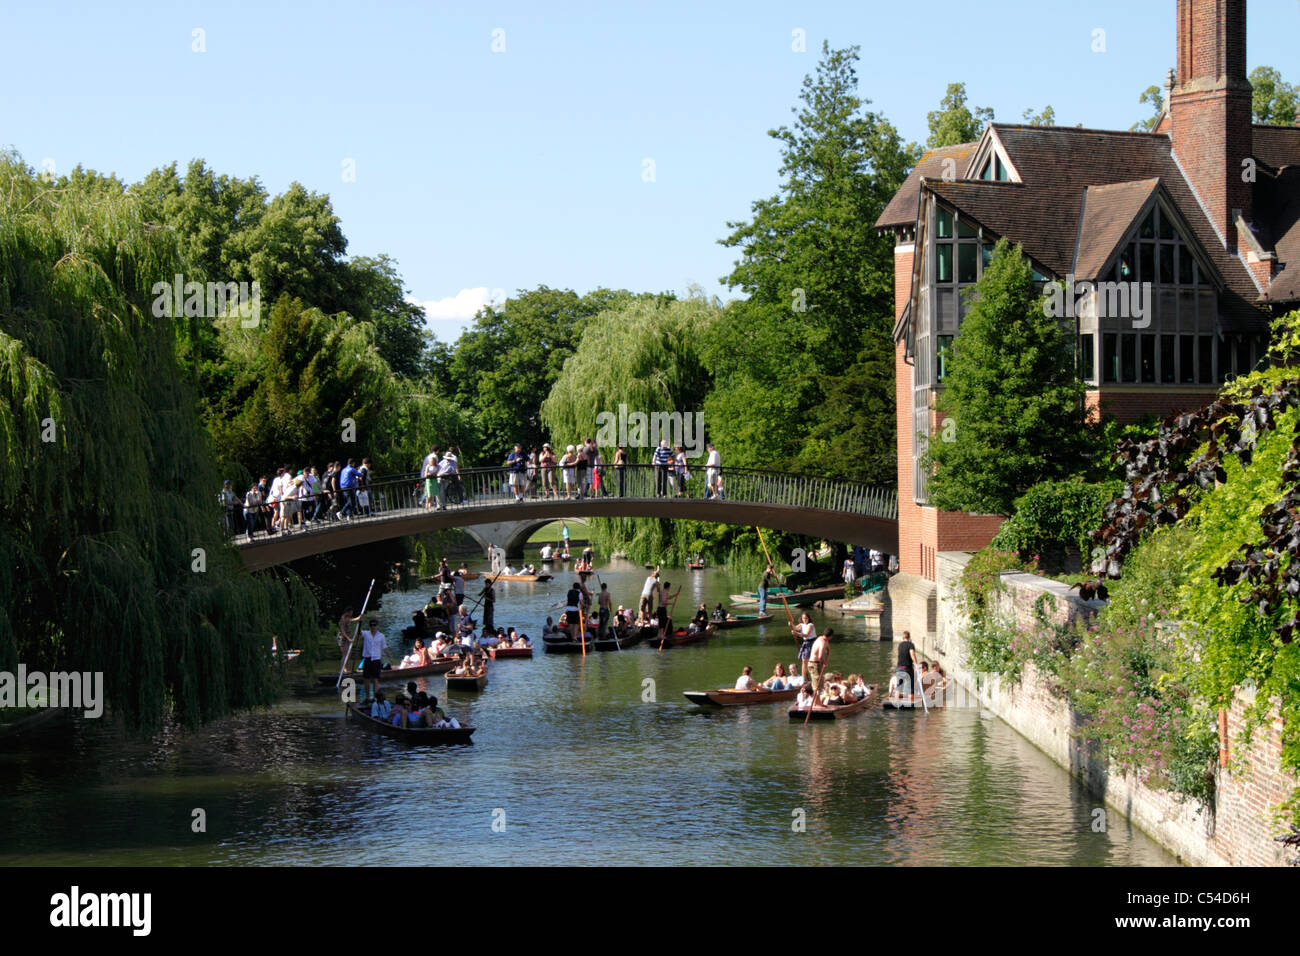 Punting on the River Cam Cambridge Jerwood Library on right Stock Photo